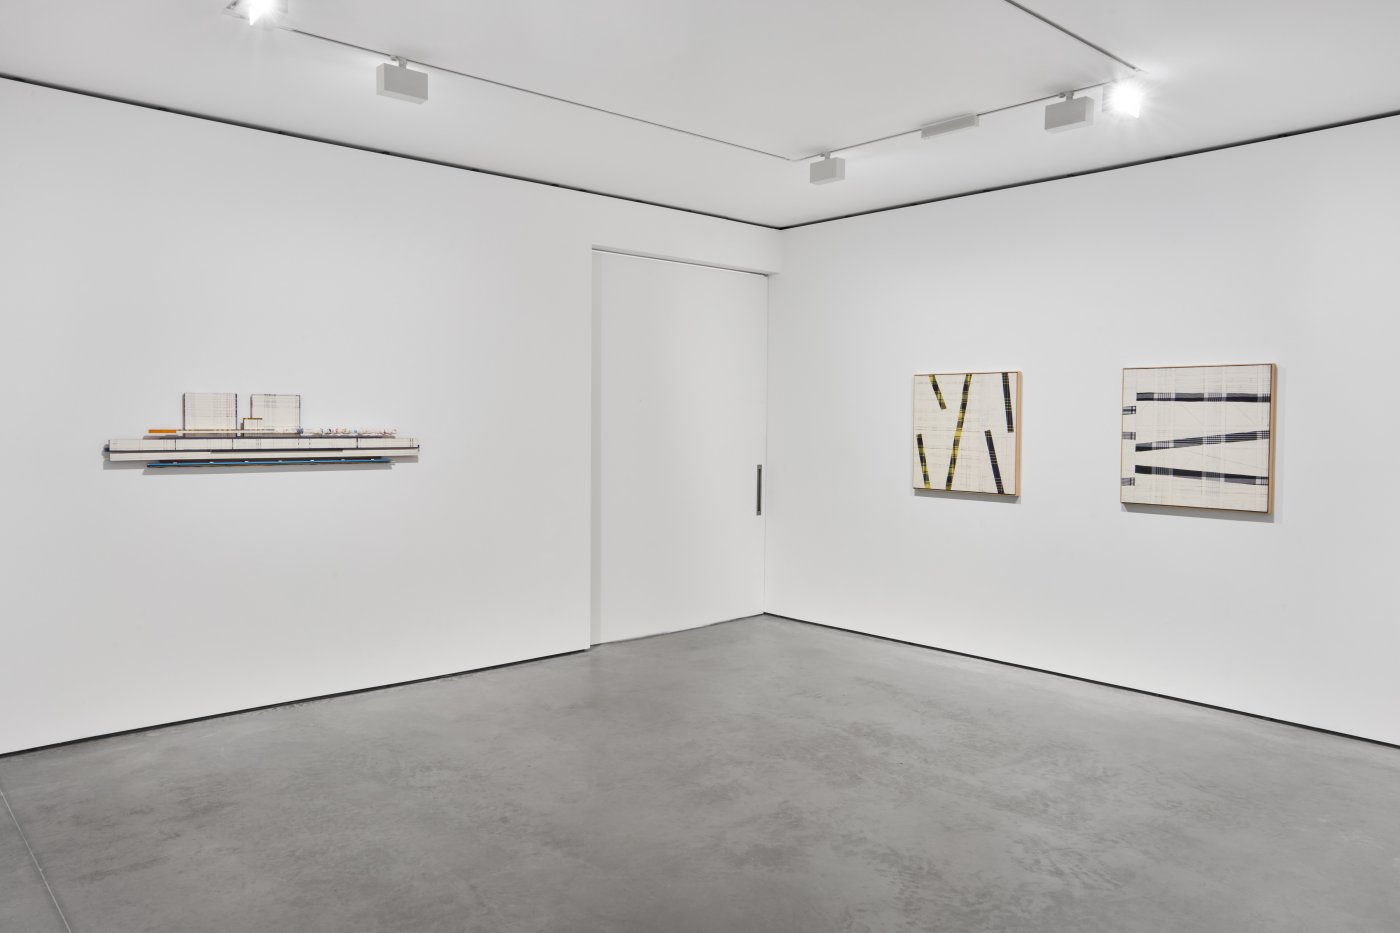 Installation image for Remy Jungerman: Fault Lines, at Goodman Gallery